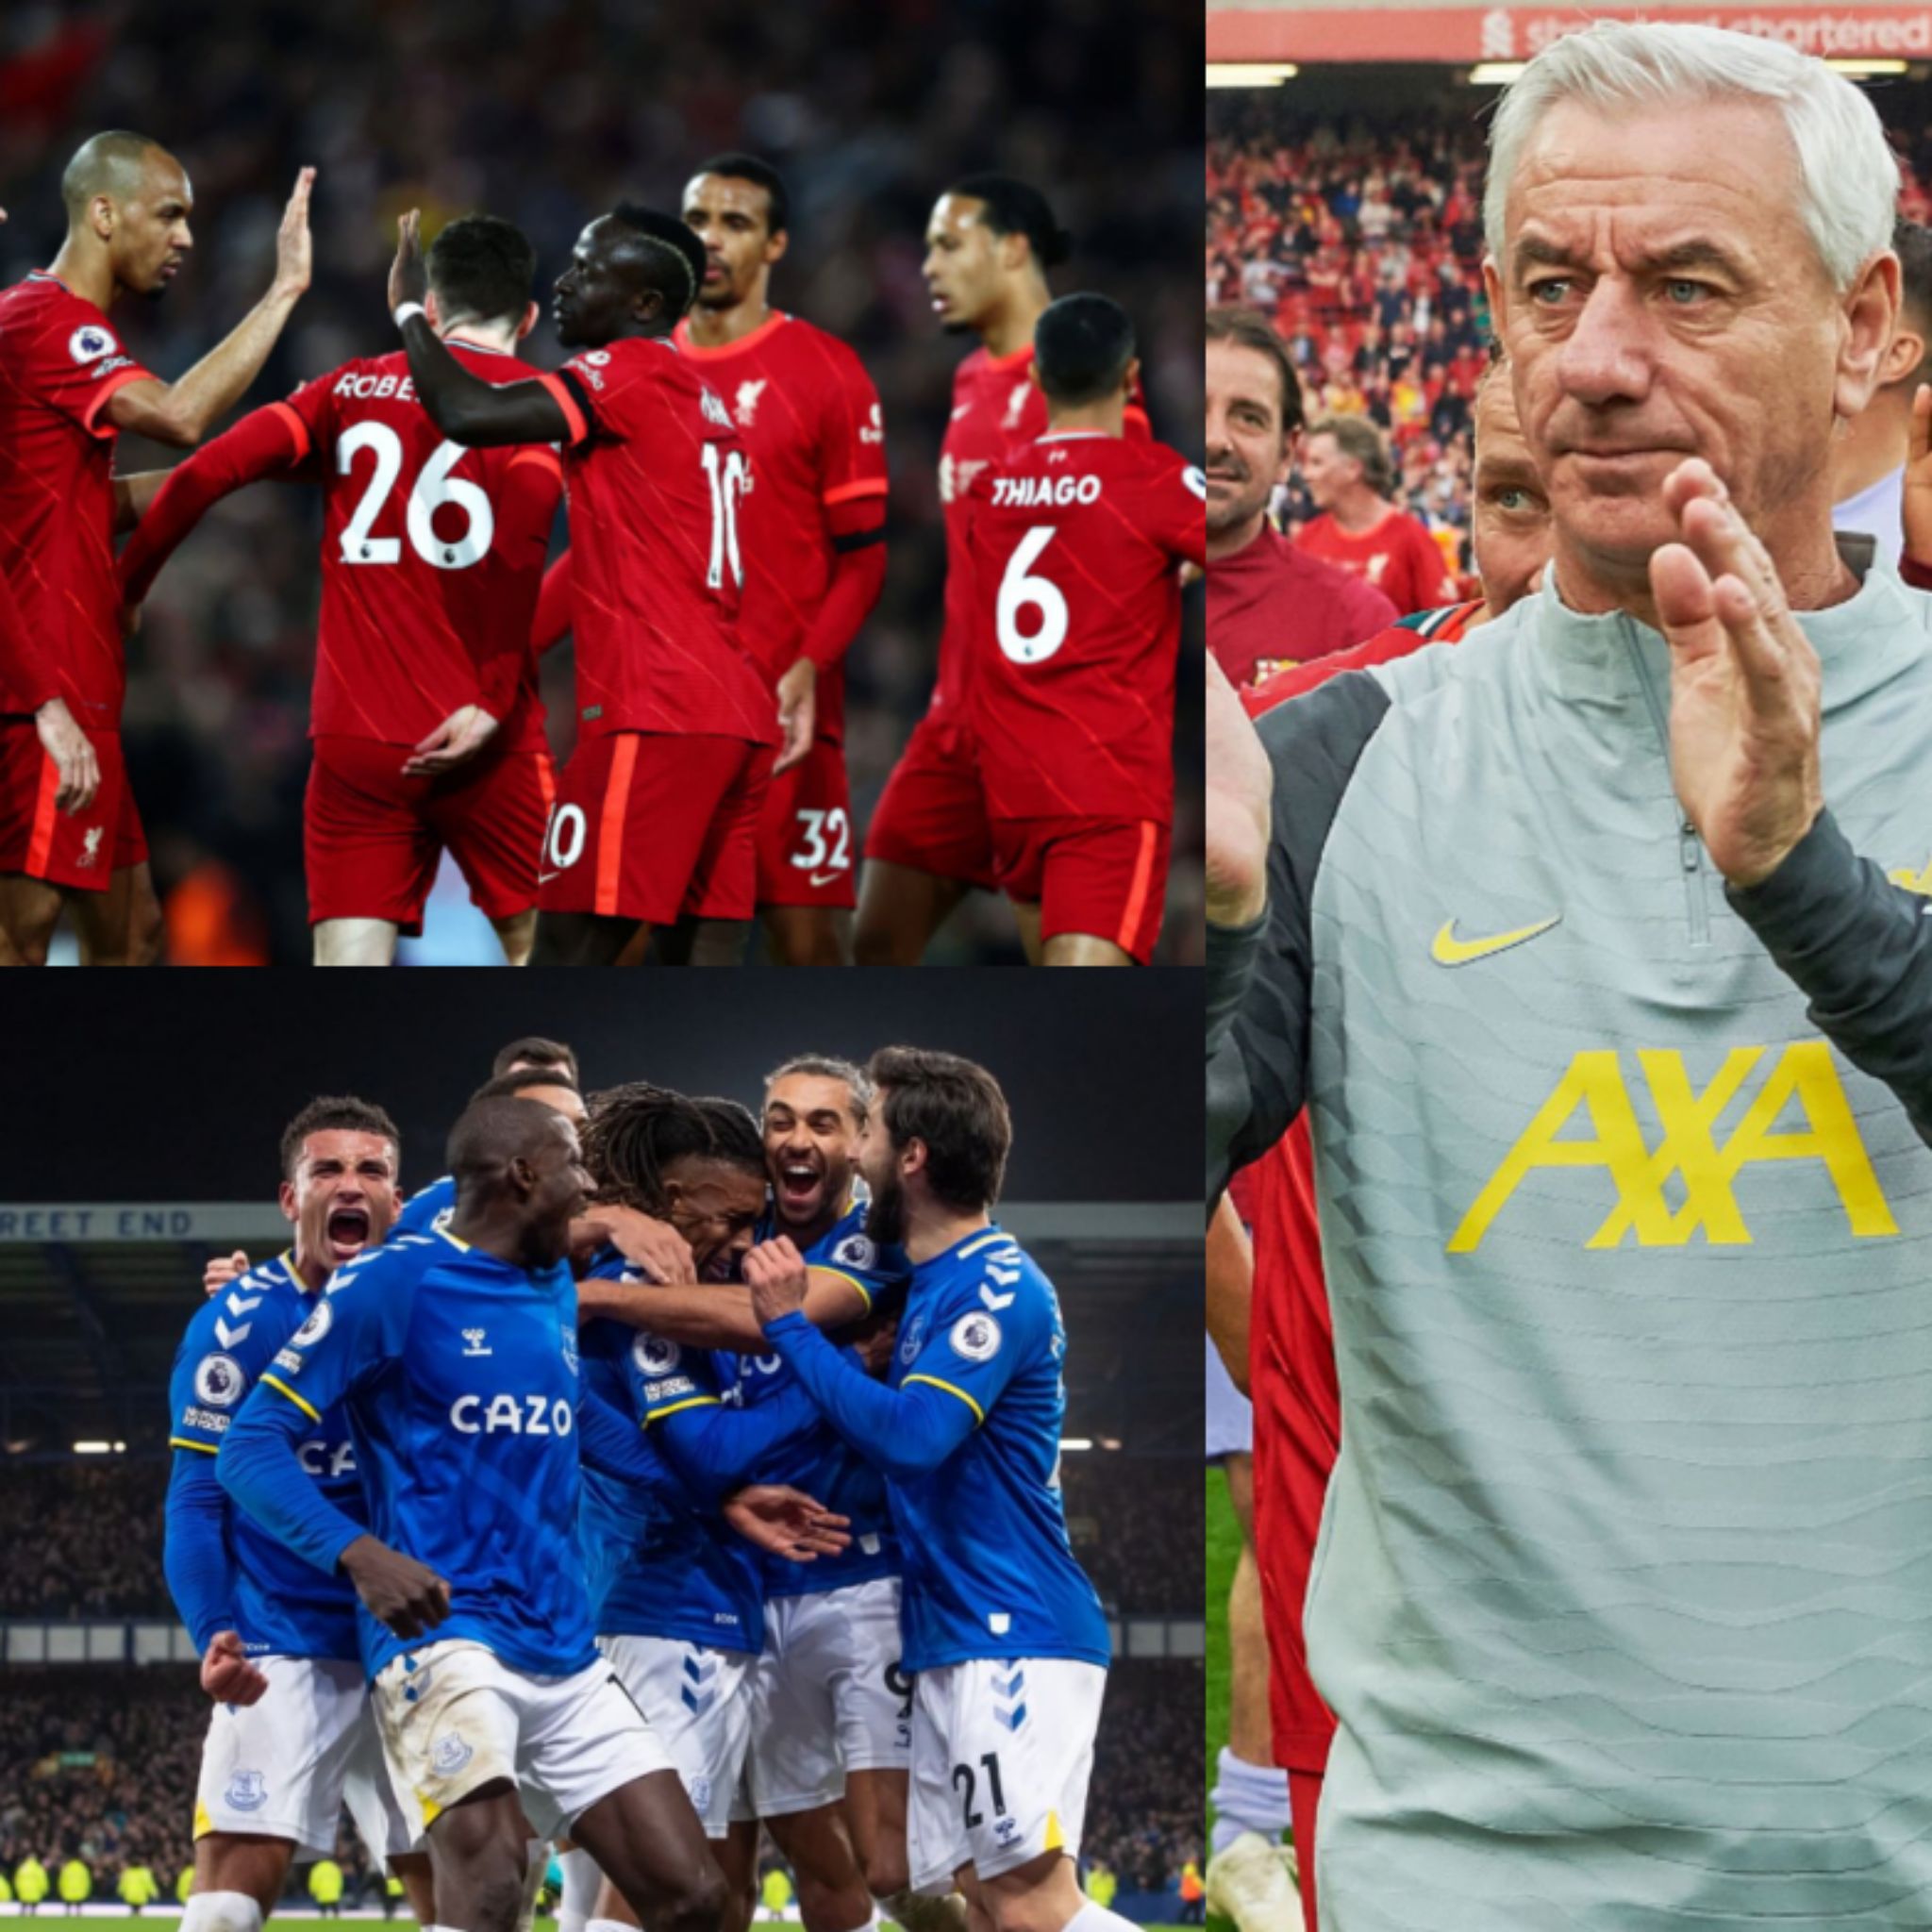 ‘Everton Relegation Would Be Shameful To City Of Liverpool’  –Ian Rush Previews Merseyside Derby